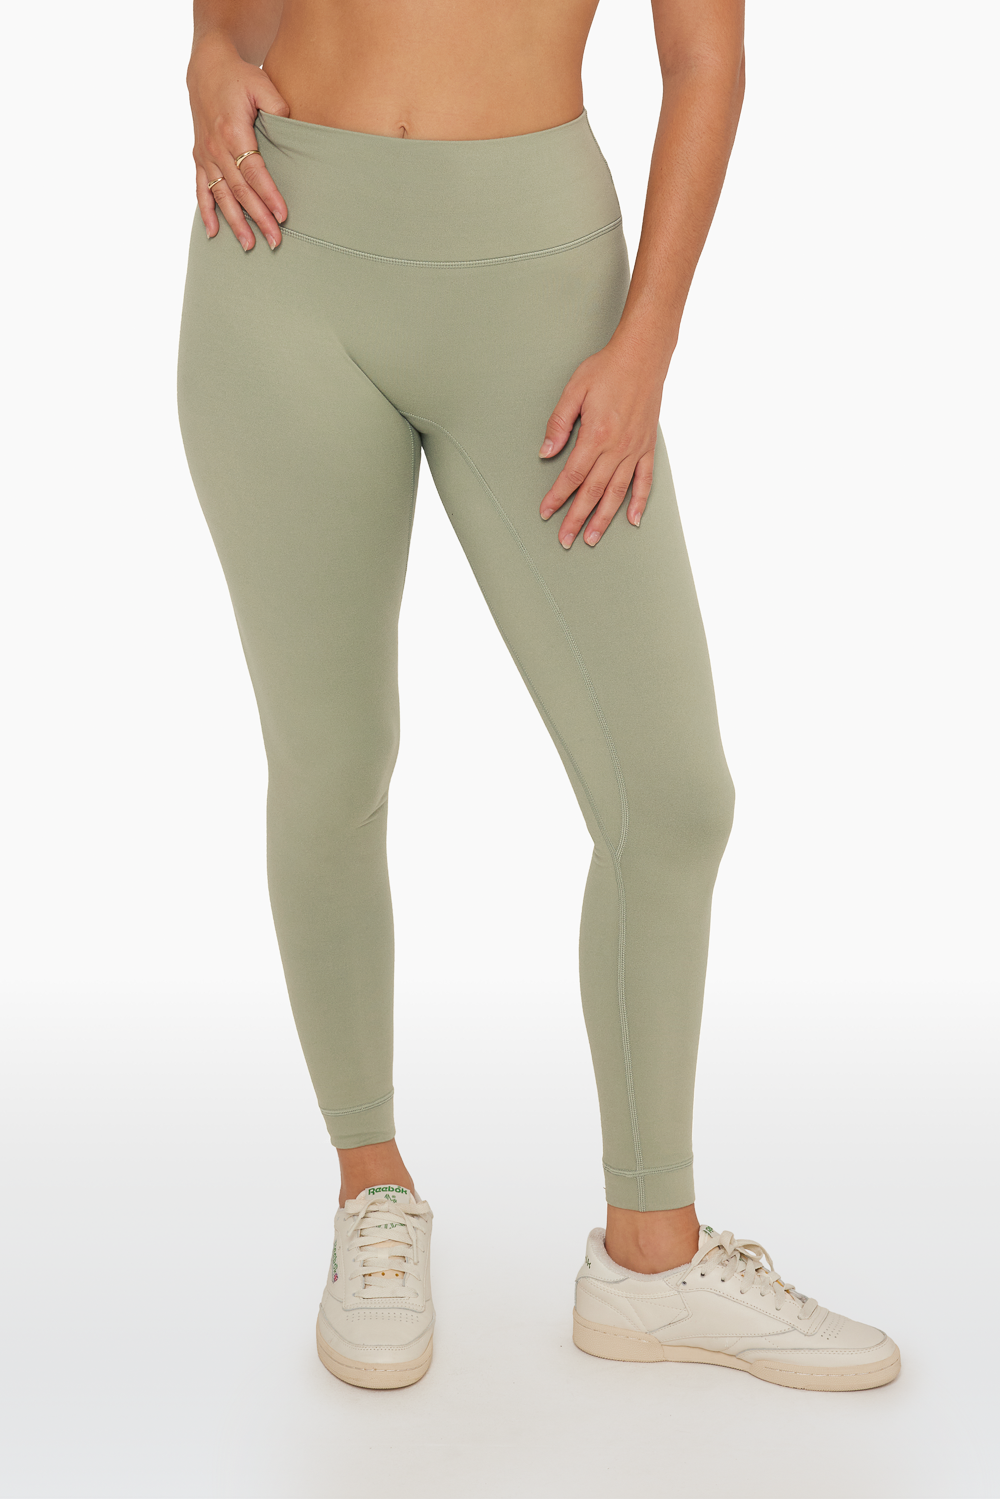 FORMCLOUD™ LEGGINGS - MOSS Featured Image